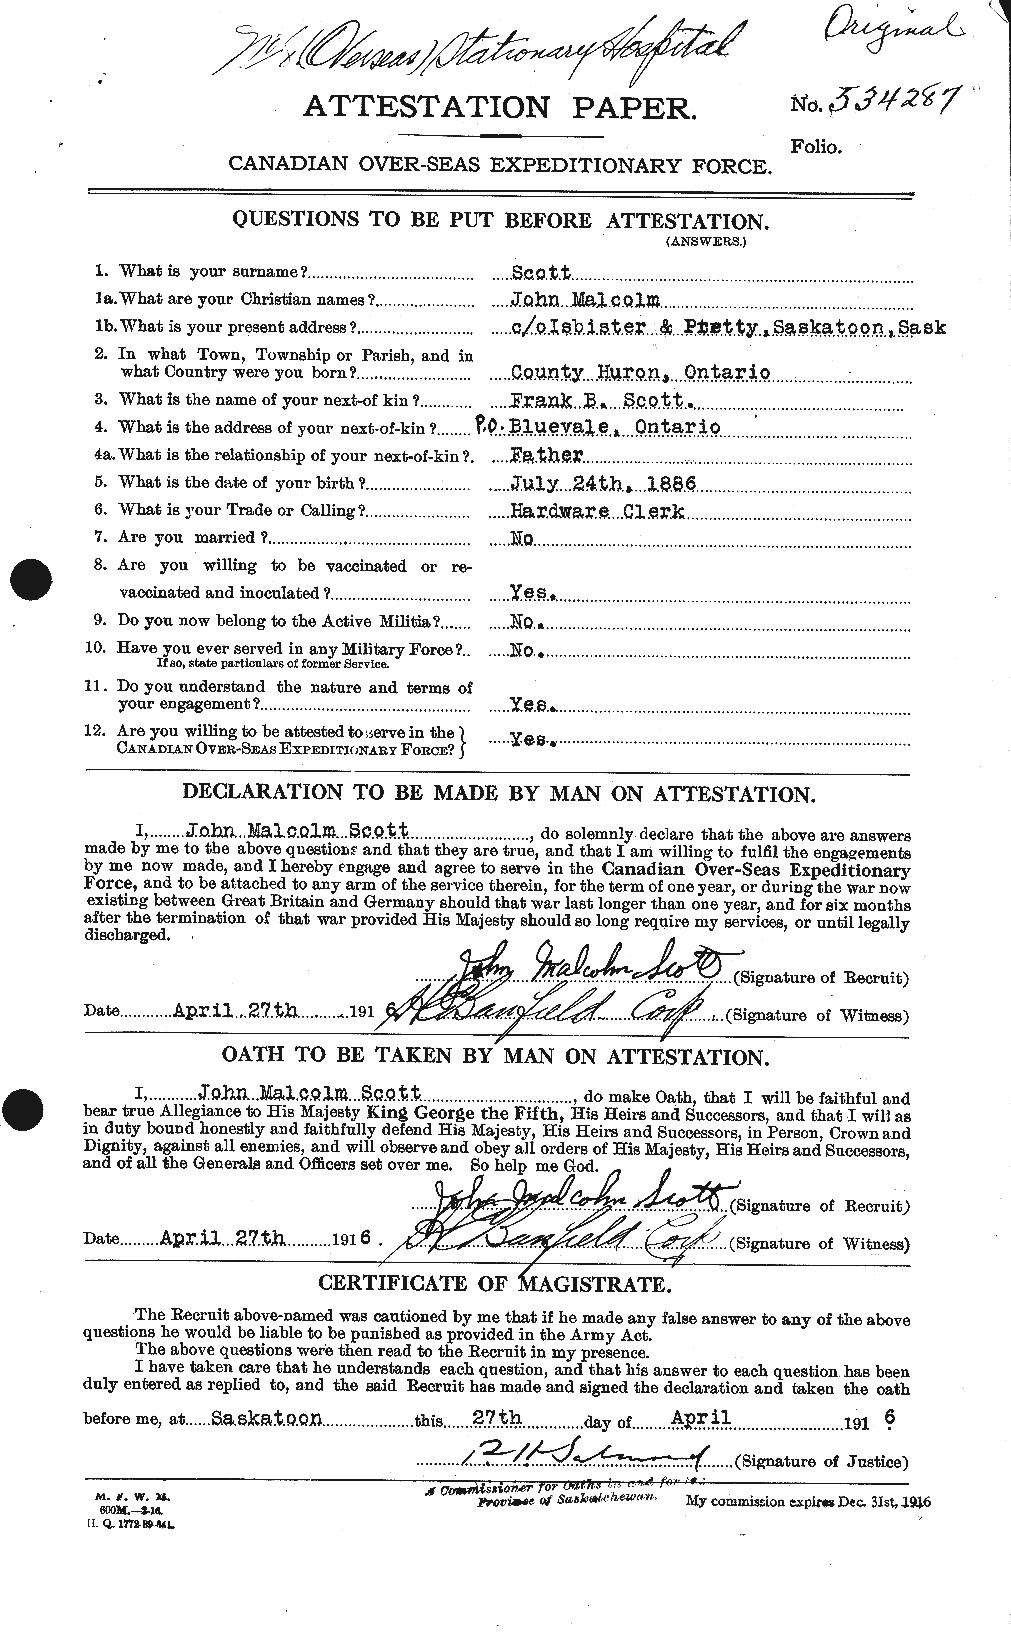 Personnel Records of the First World War - CEF 084443a